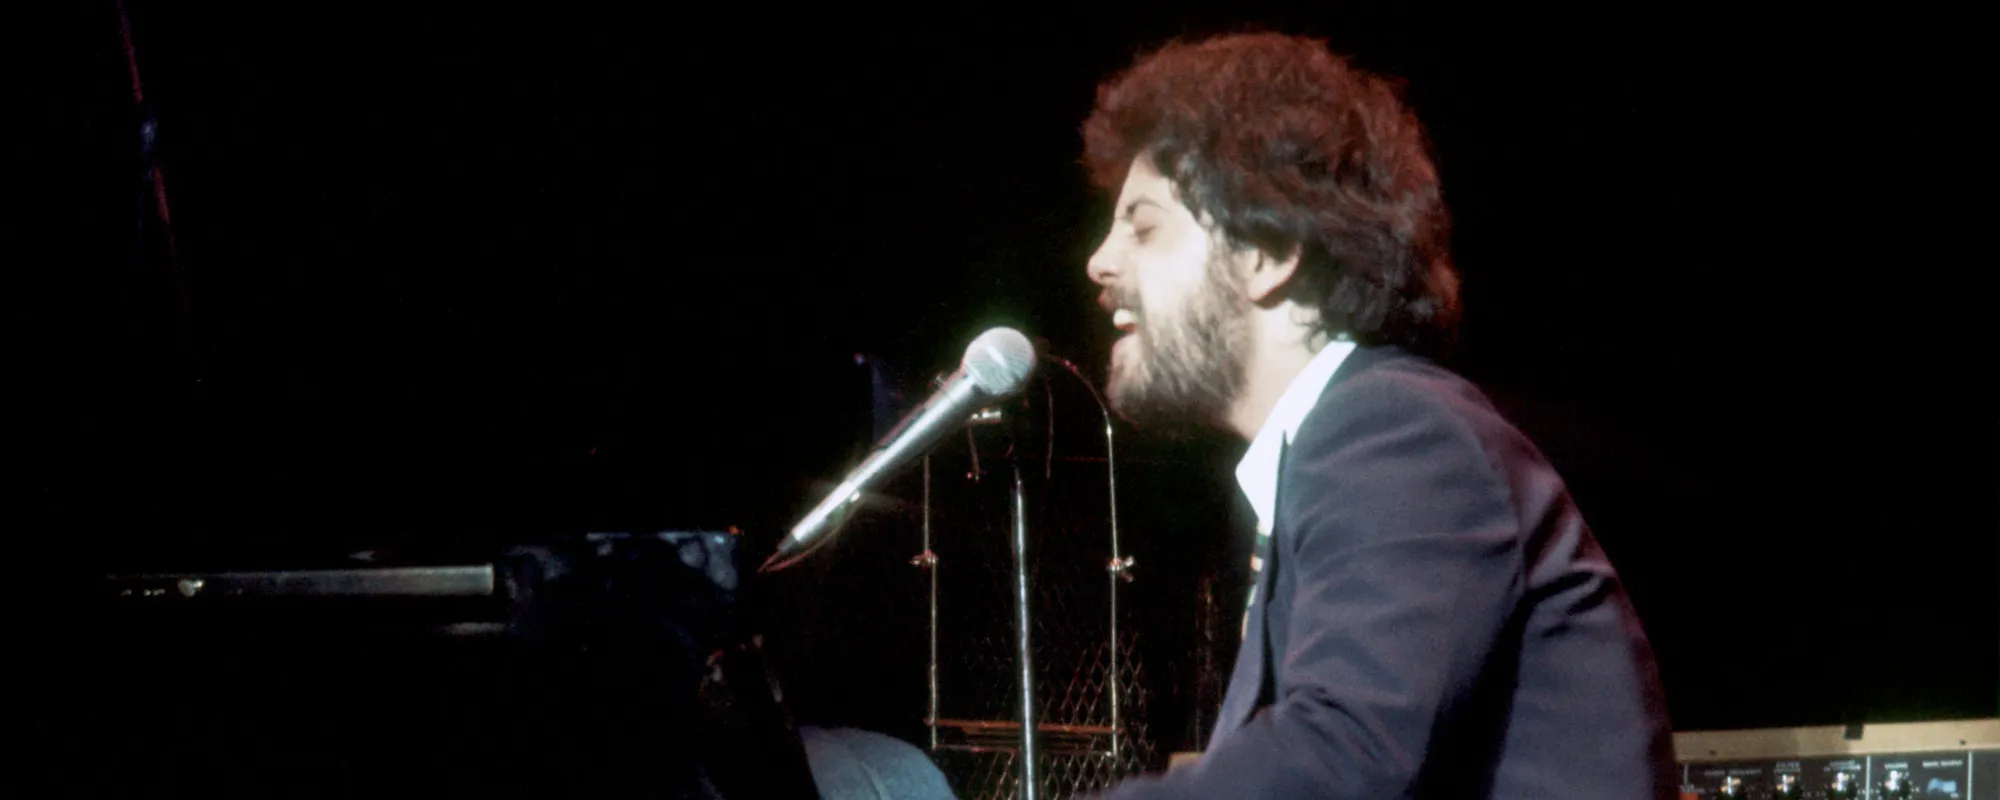 The Meaning Behind “Honesty” by Billy Joel and Why He Initially Struggled with the Lyrics